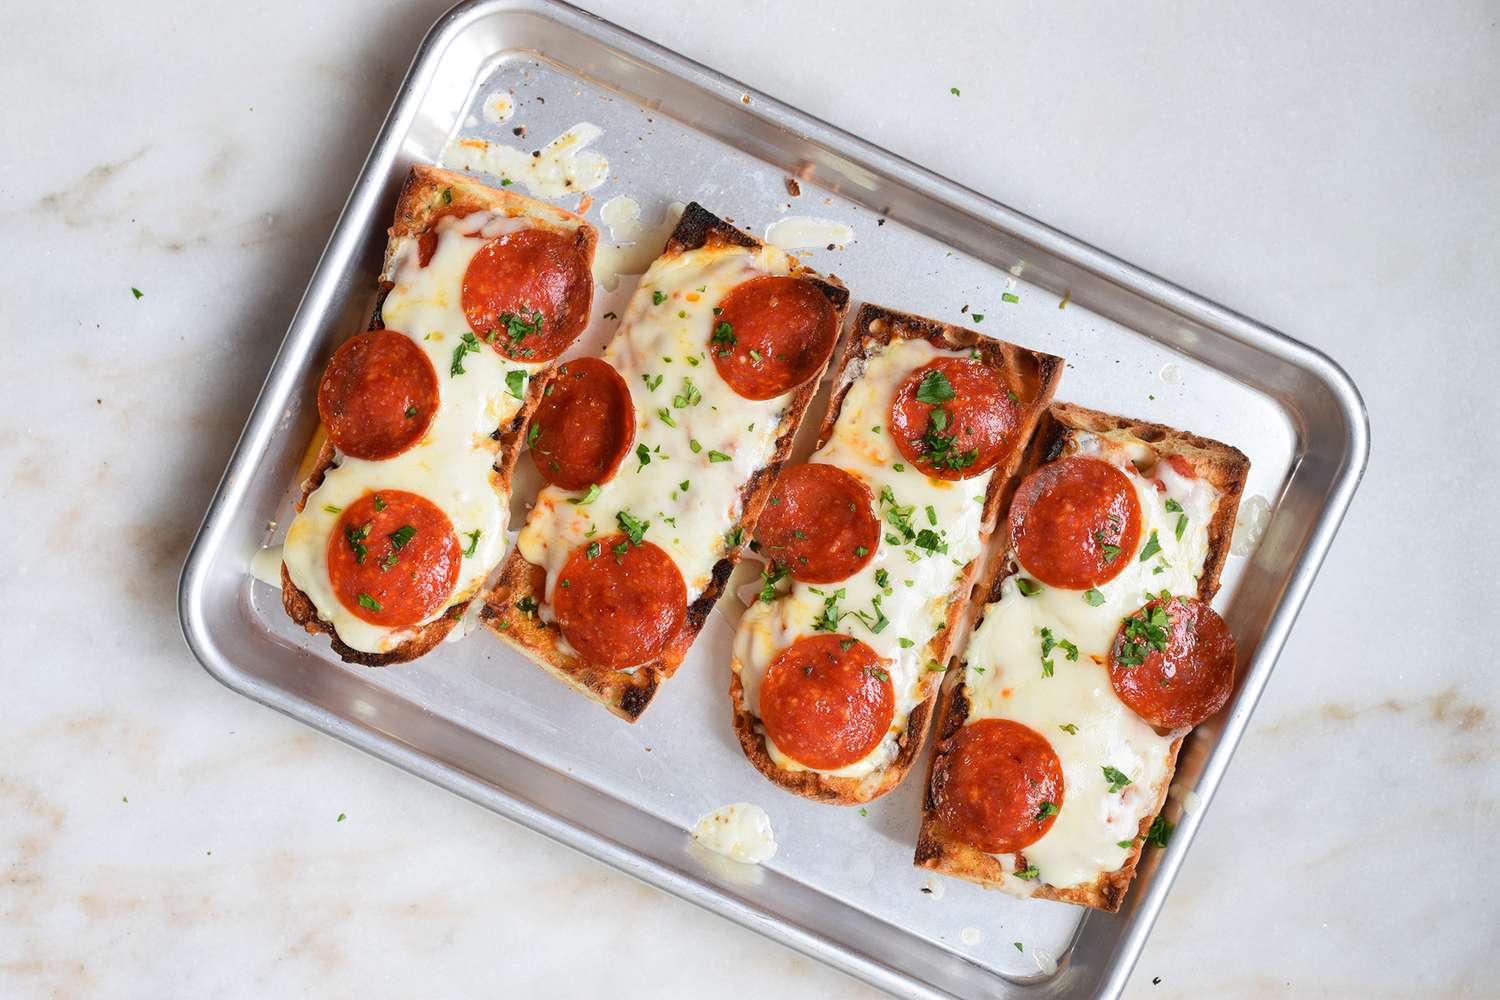 baked french bread pizza topped with chopped parsley